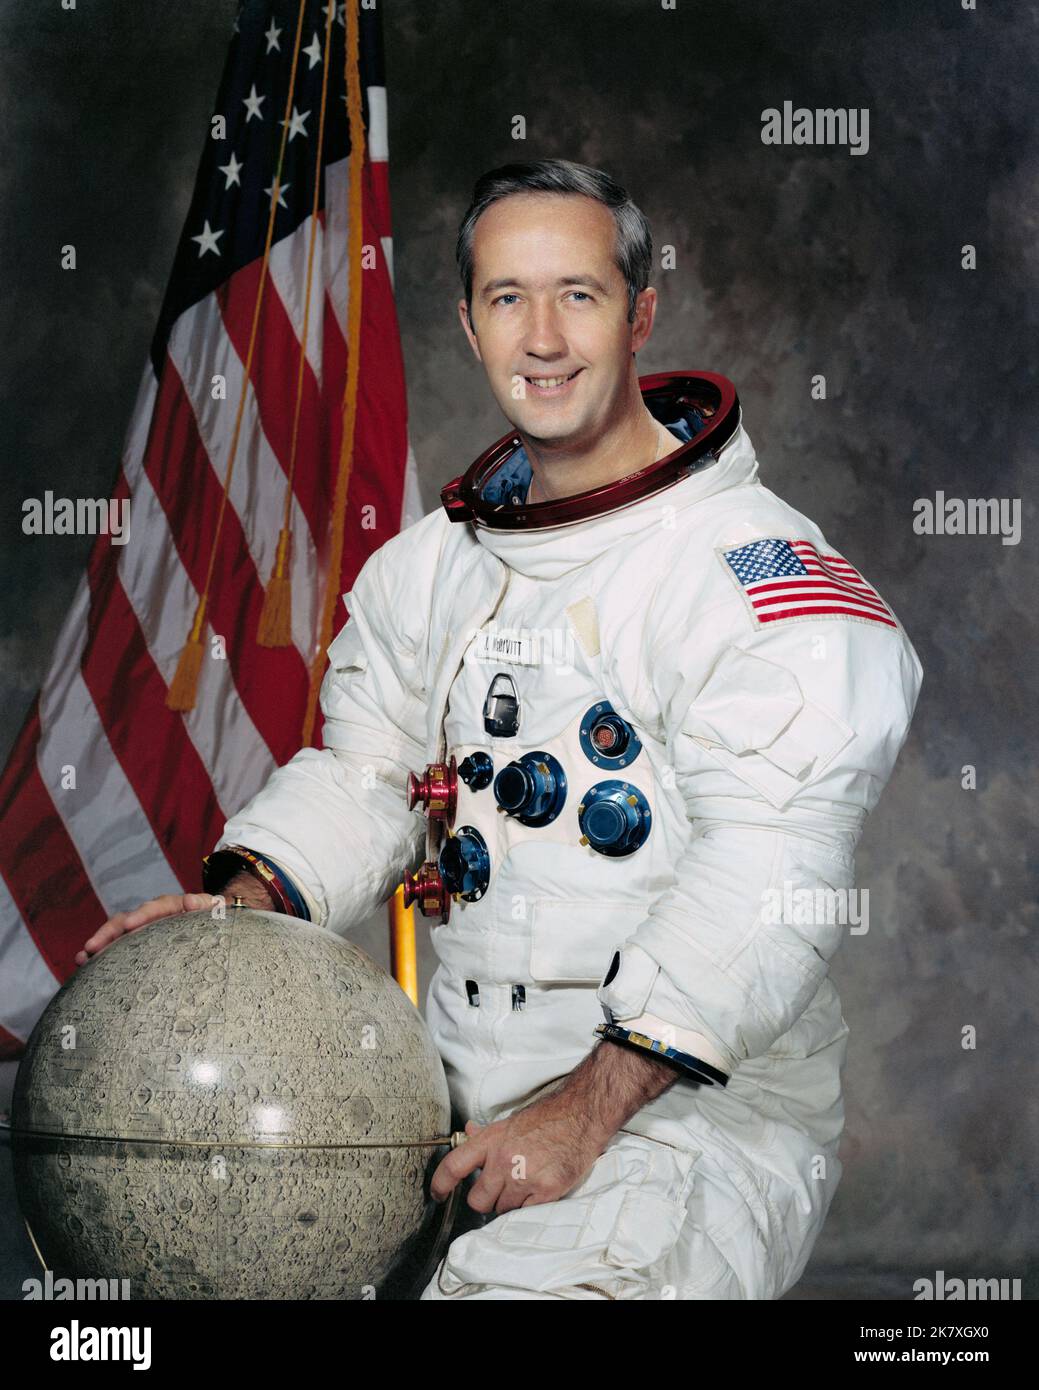 Astronaut James A. McDivitt, McDivitt commanded Gemini IV, the second crewed Gemini flight, and Apollo 9, which tested the first lunar module in Earth orbit. Stock Photo